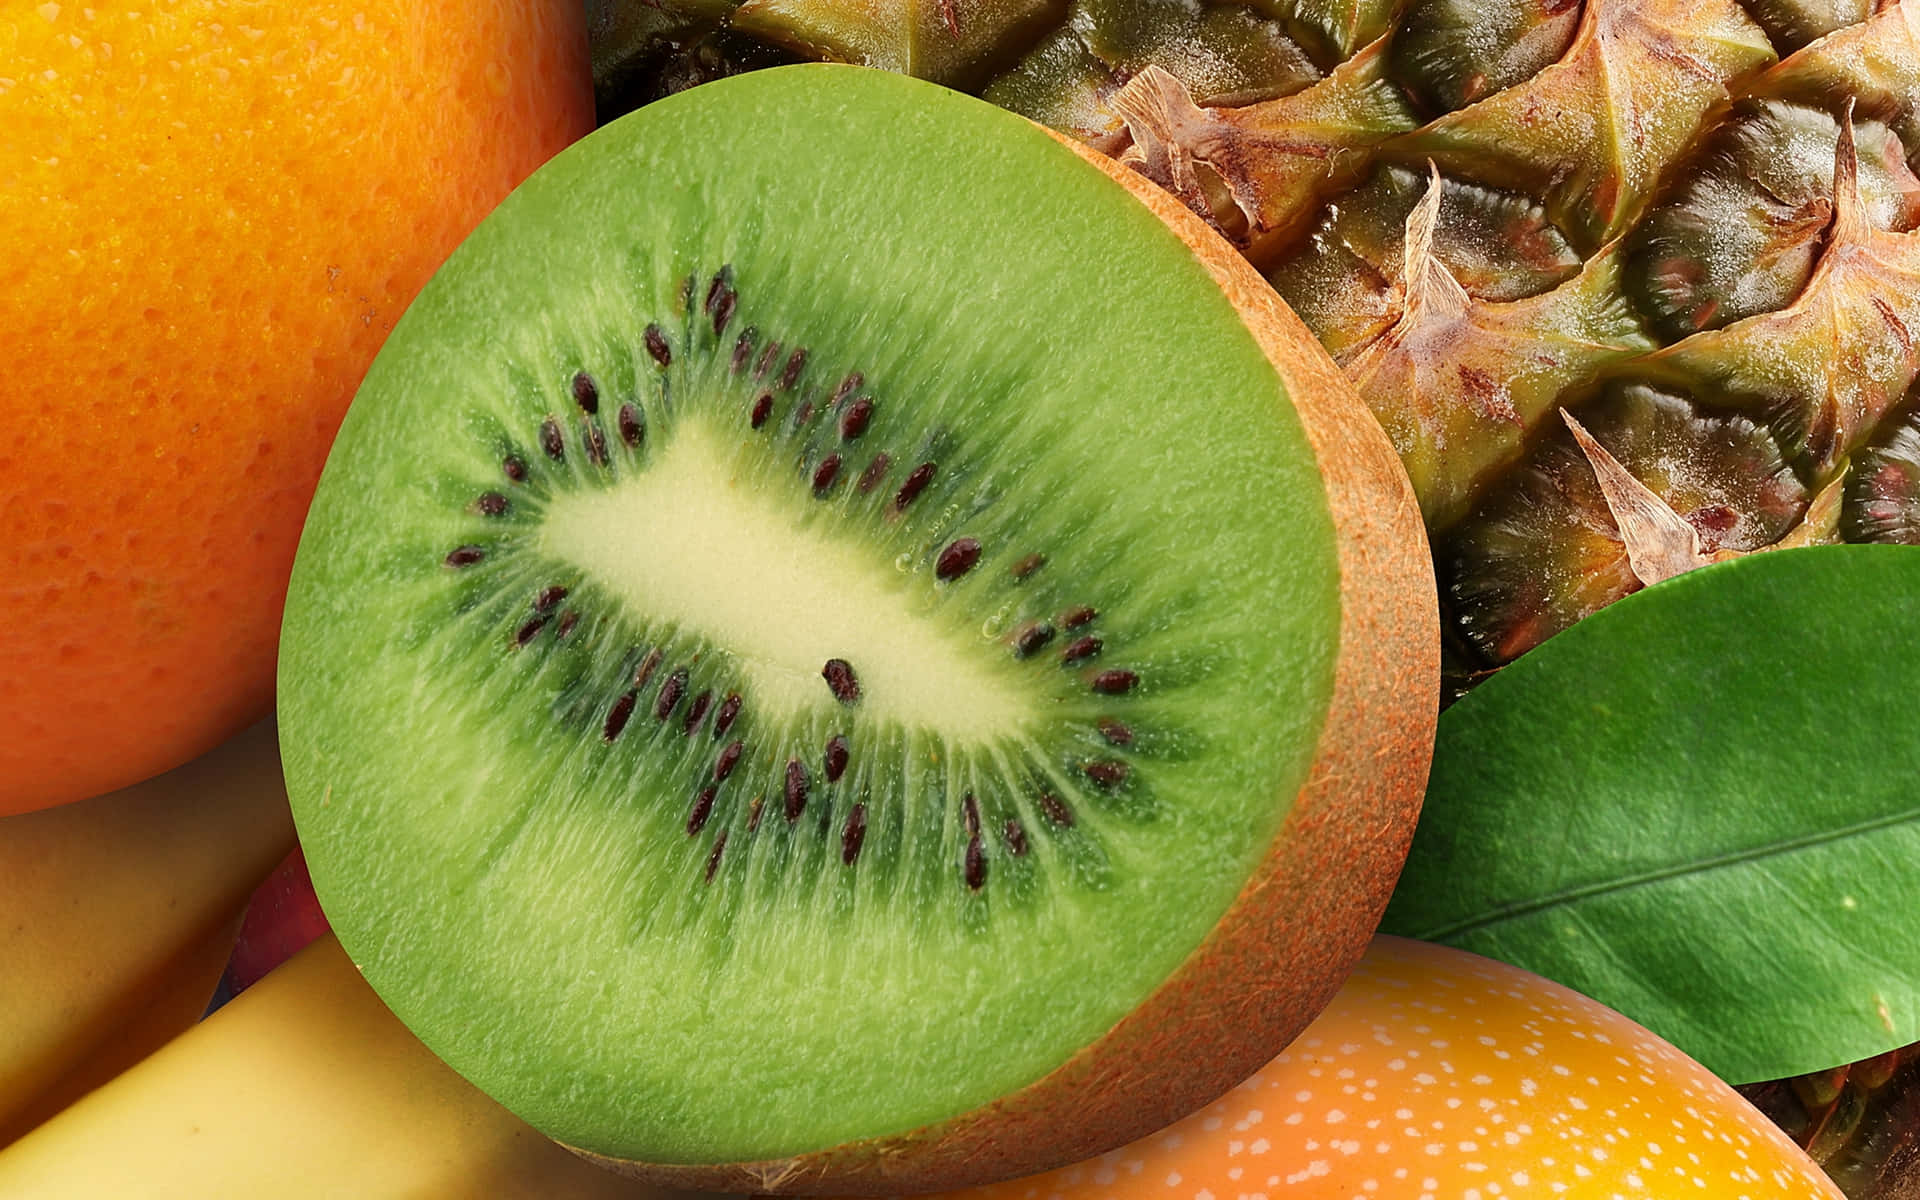 A Close-up of Ripe Kiwi Slices with an Artistic Touch